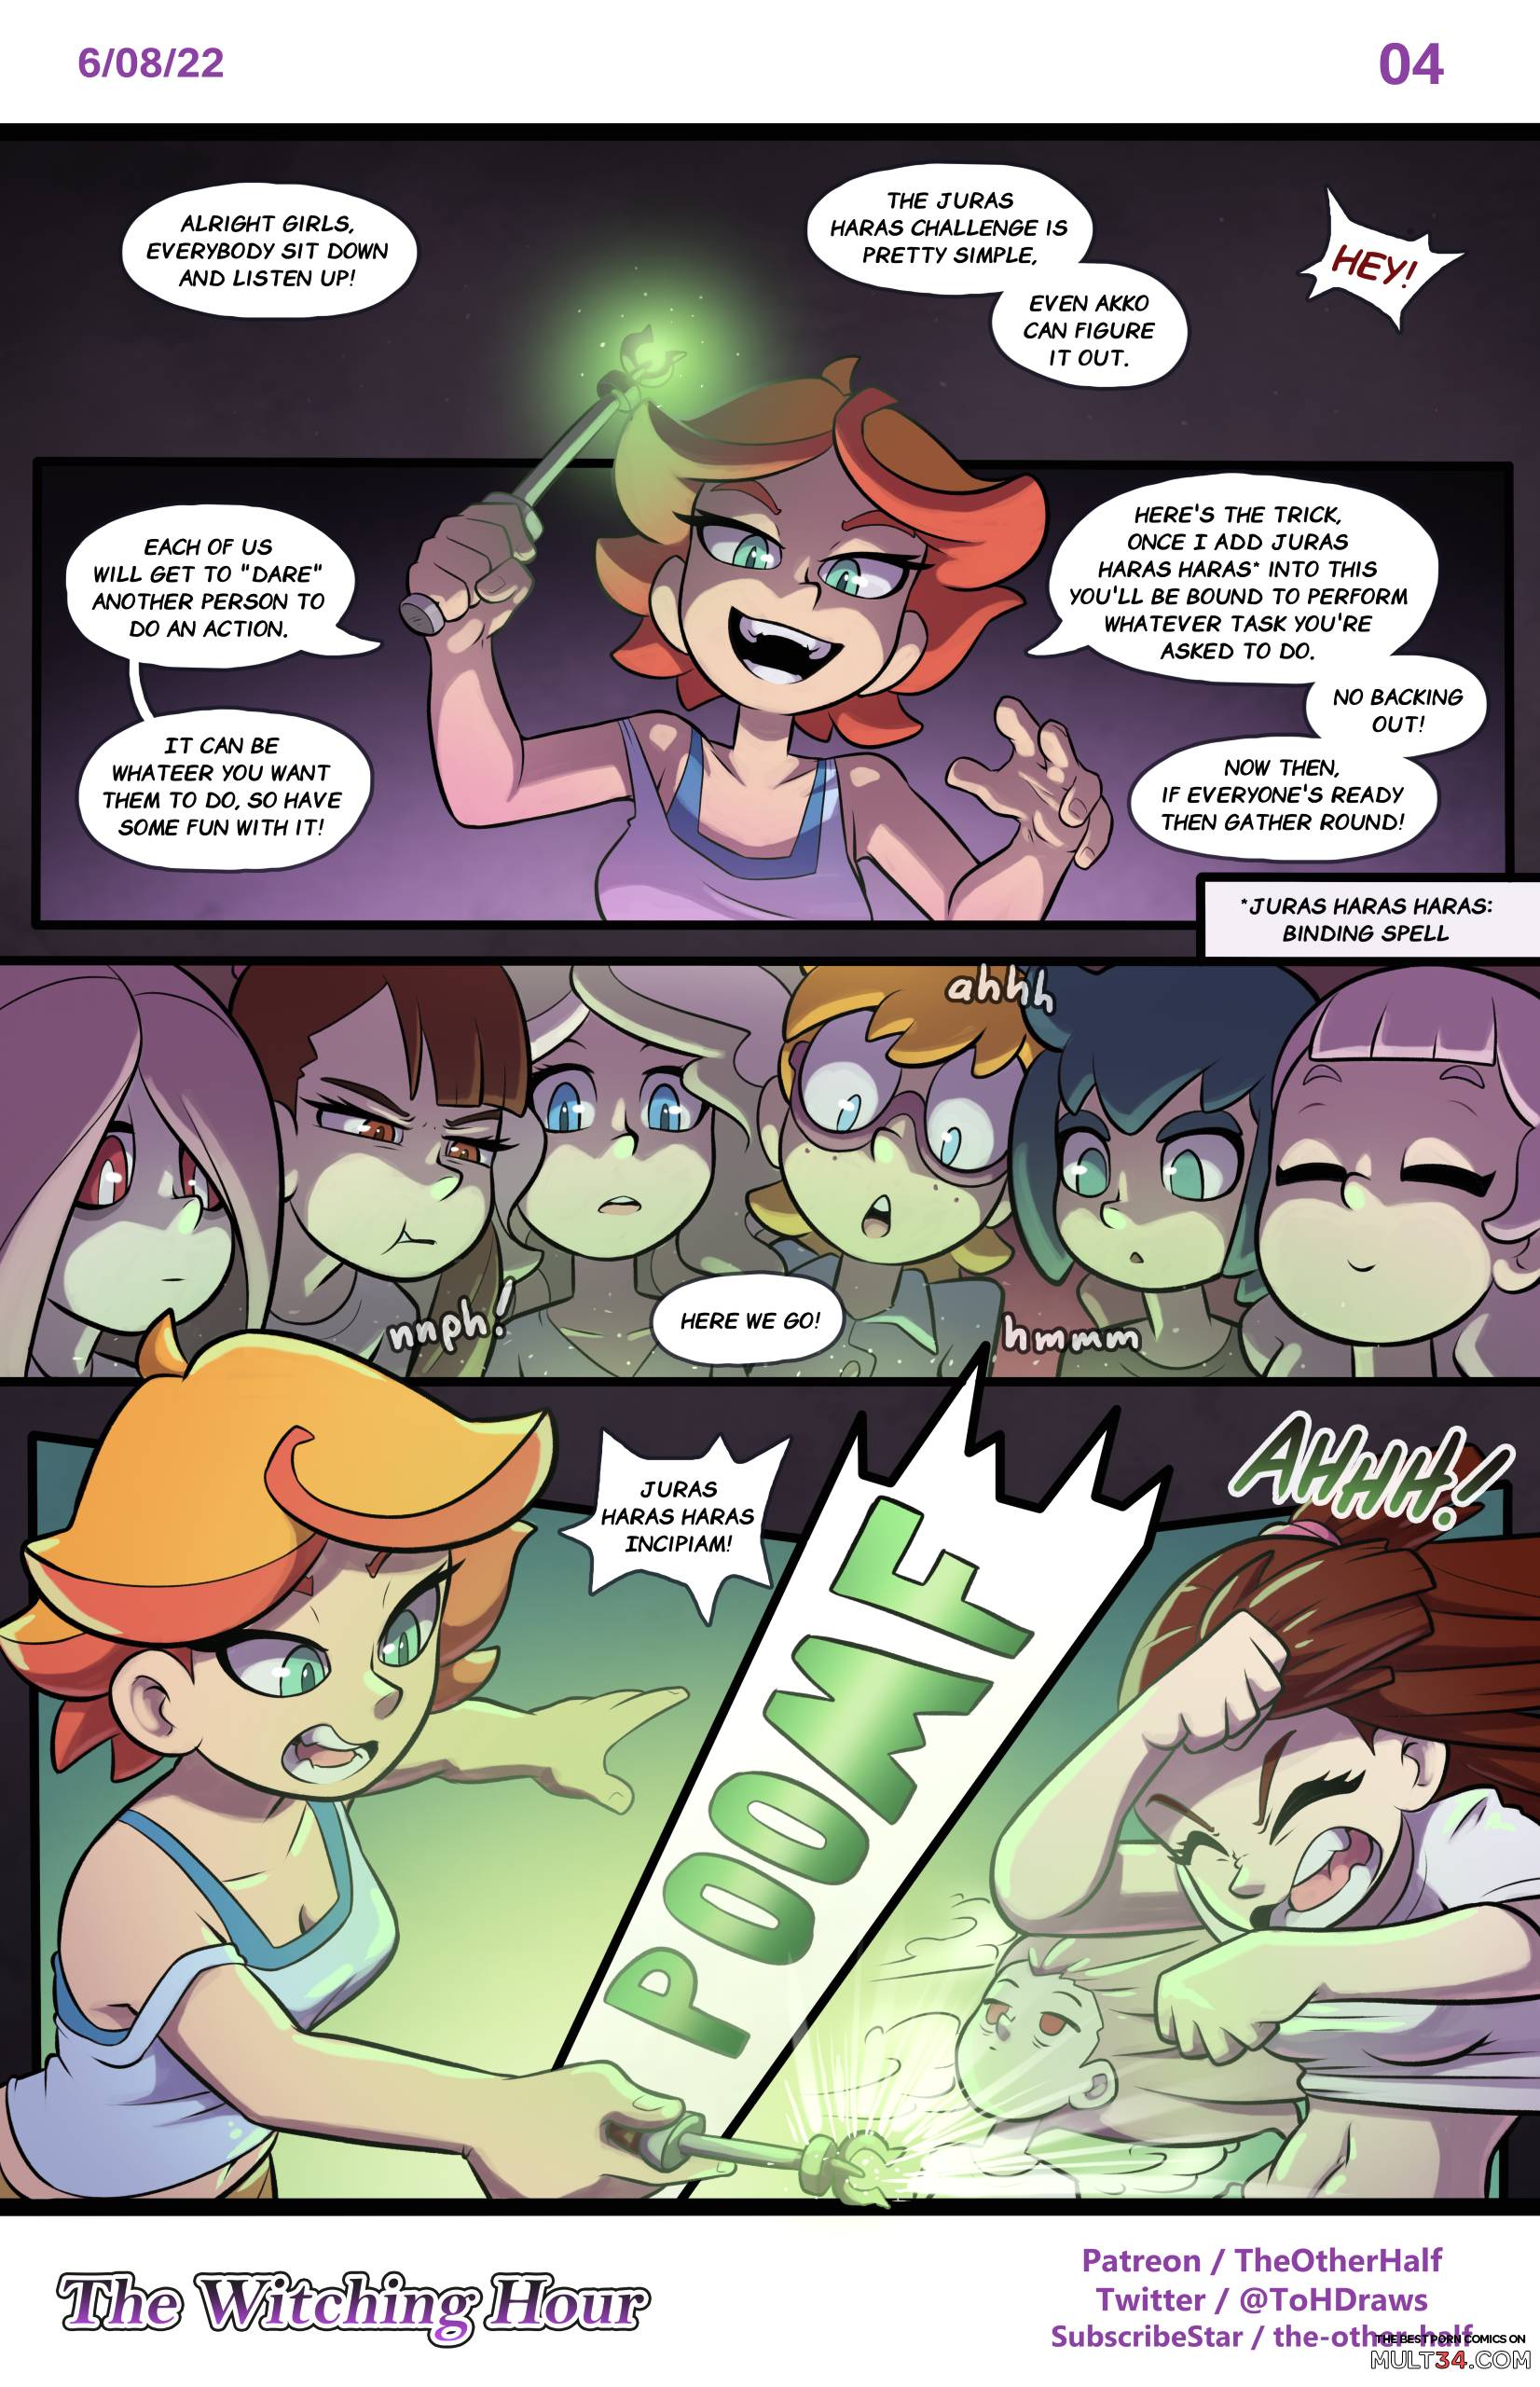 The Witching Hour - Little Witch Academia page 4